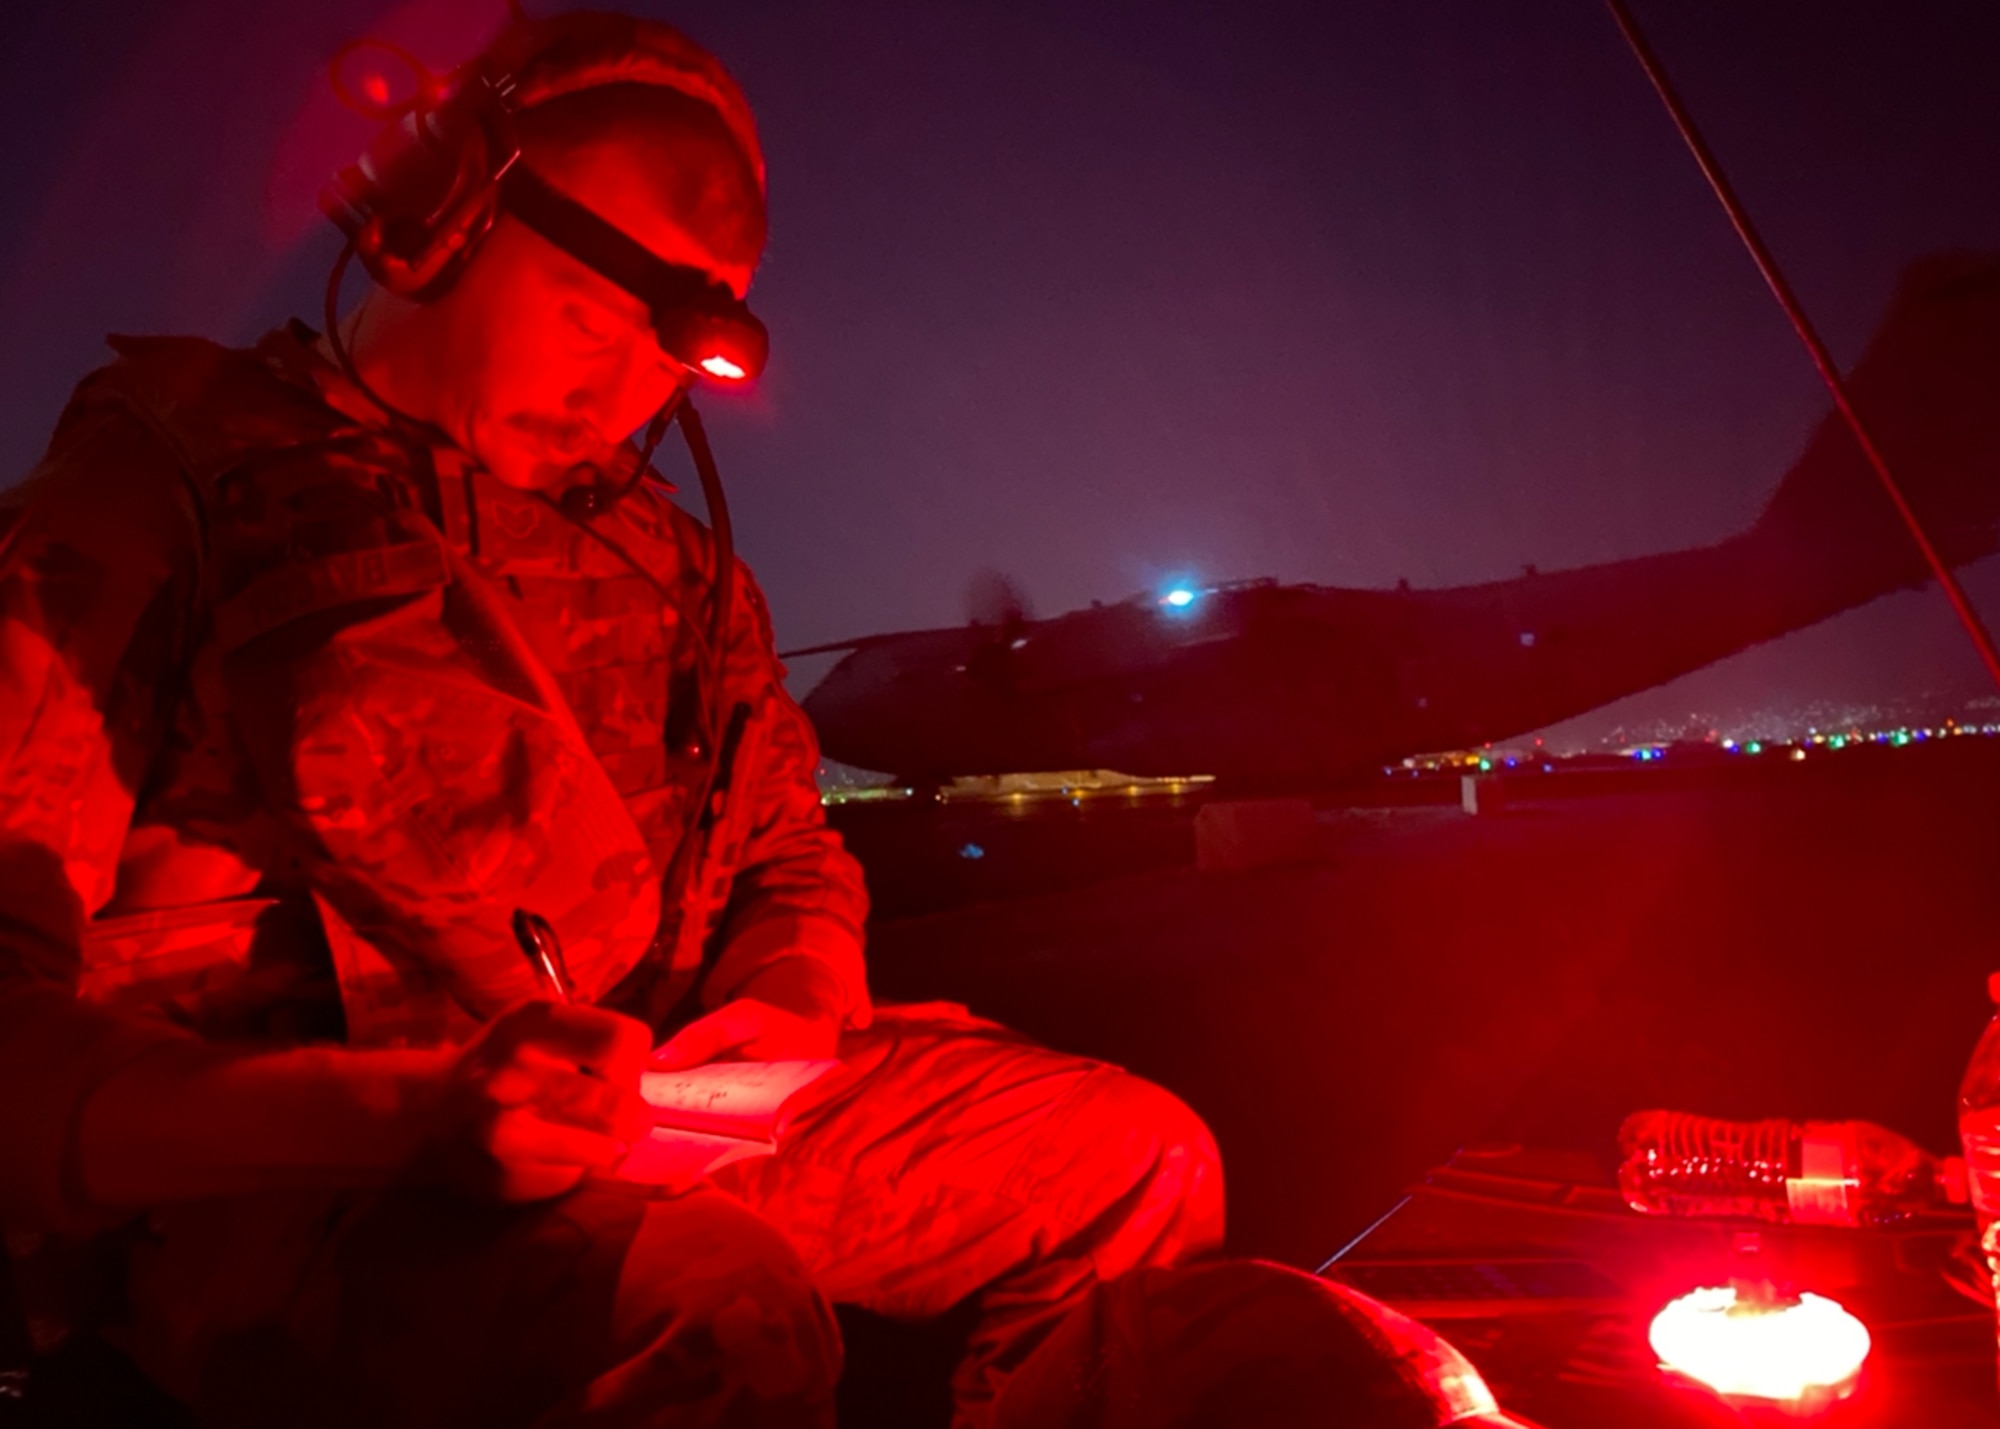 Staff Sgt. Harold Balcom, 75th Operations Support Squadron, performs night operations while an Airbus A400 taxis out with civilians and cargo to evacuate out of Kabul, Afghanistan.